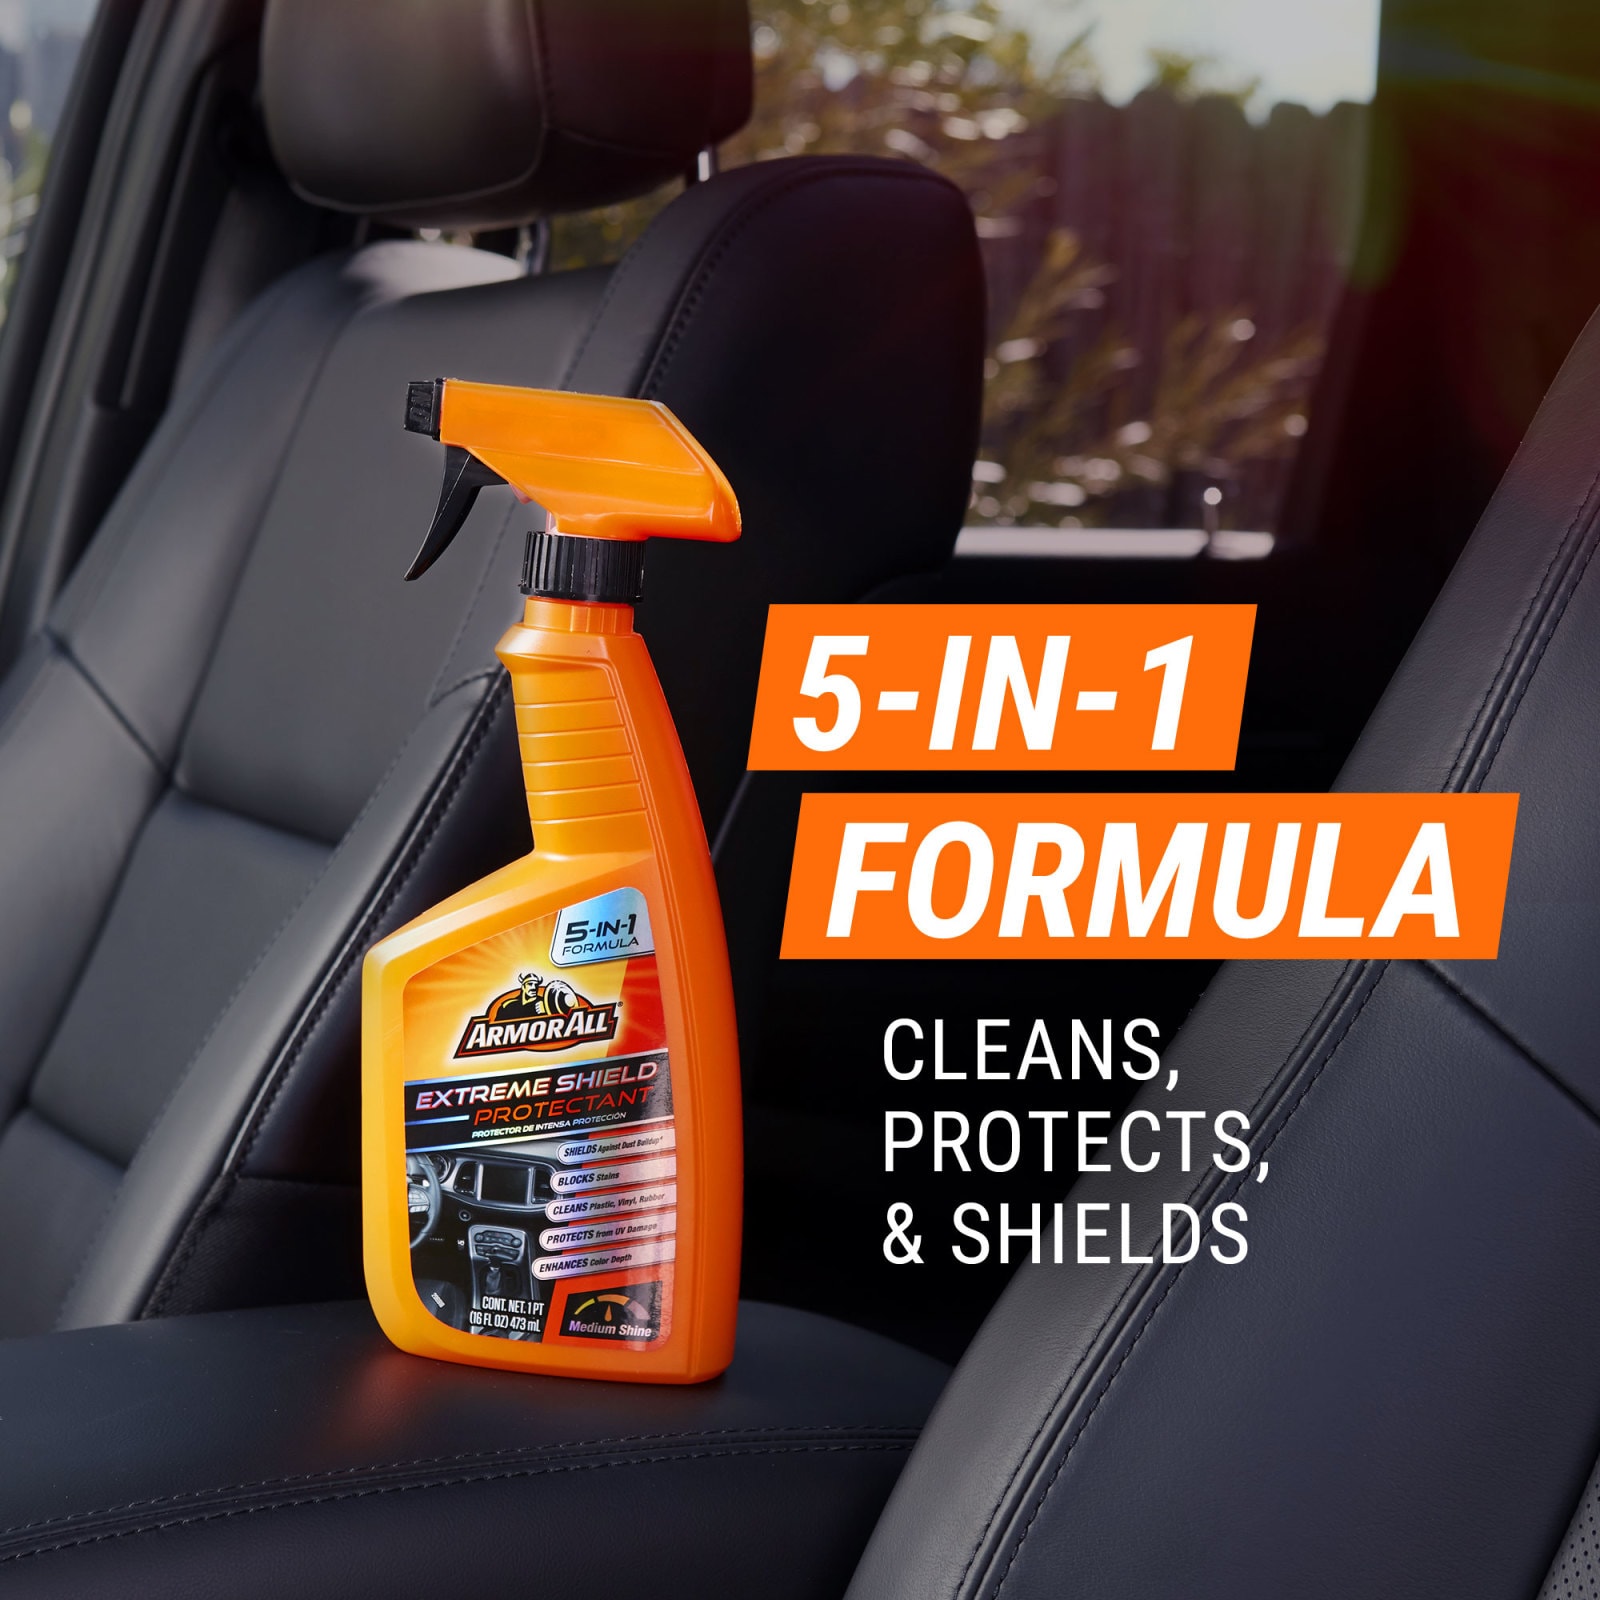 Original Protectant Spray by Armor All, Car Interior Cleaner with UV  Protection to Fight Cracking & Fading, 8 Oz, 3 Packs